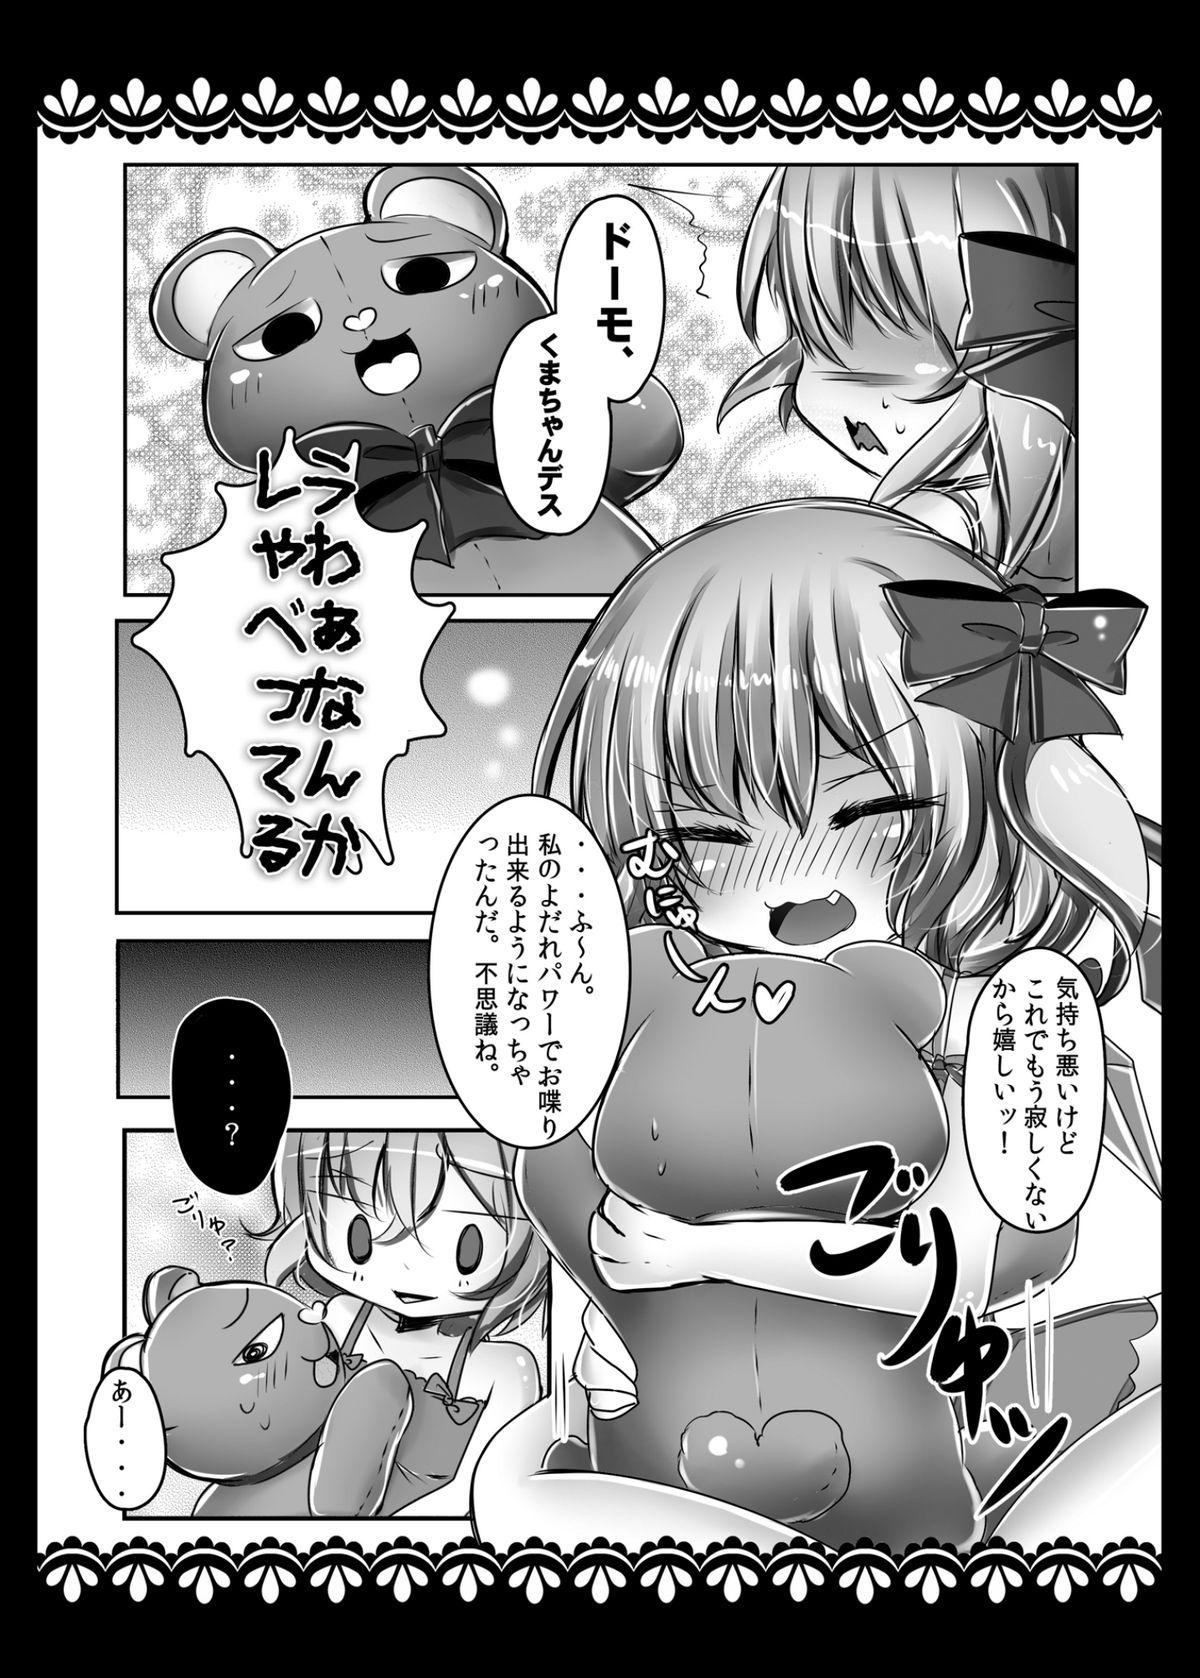 Roughsex Stuffed Animal Paco - Touhou project Granny - Page 7